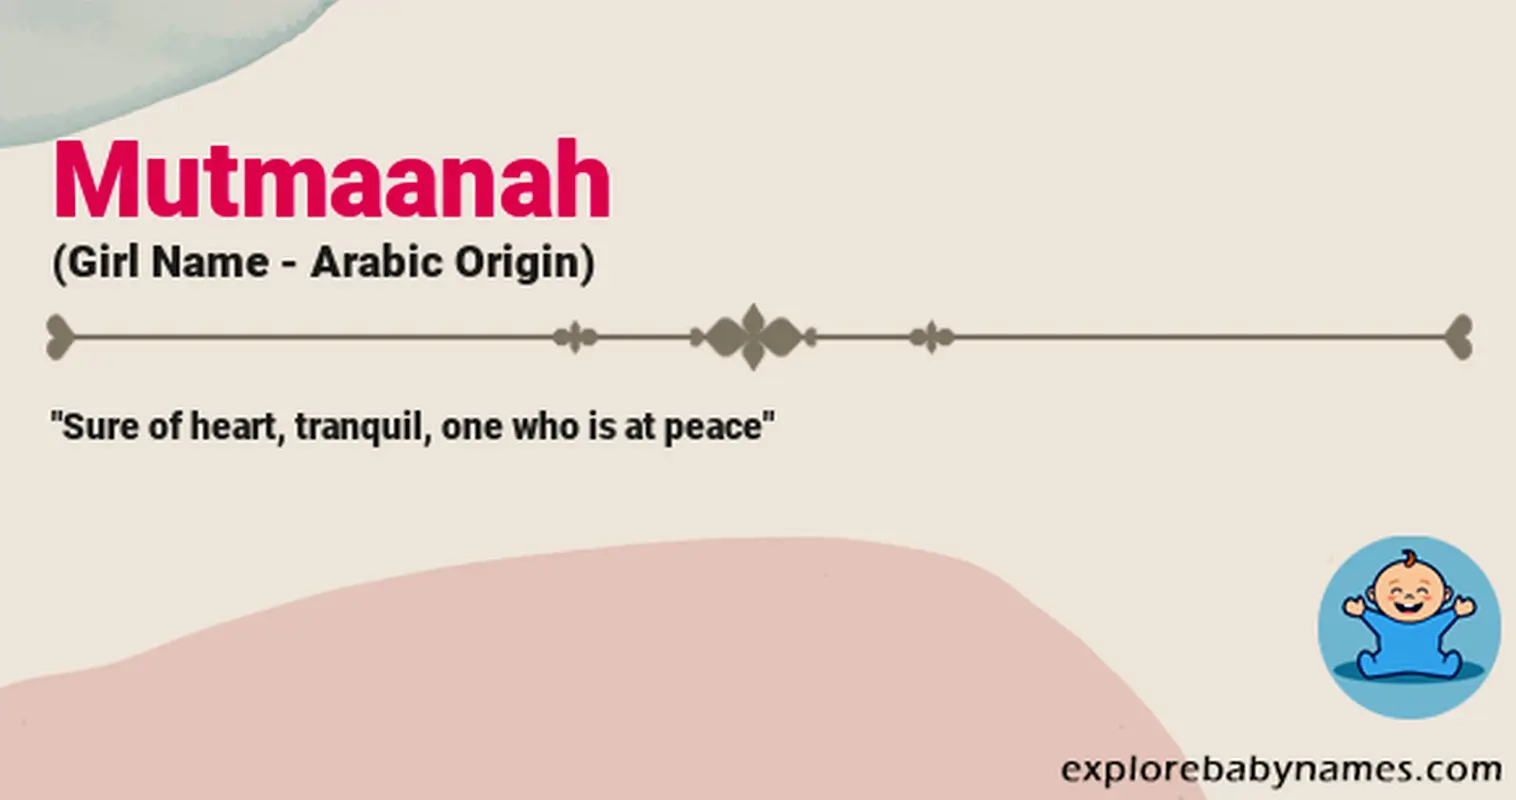 Meaning of Mutmaanah